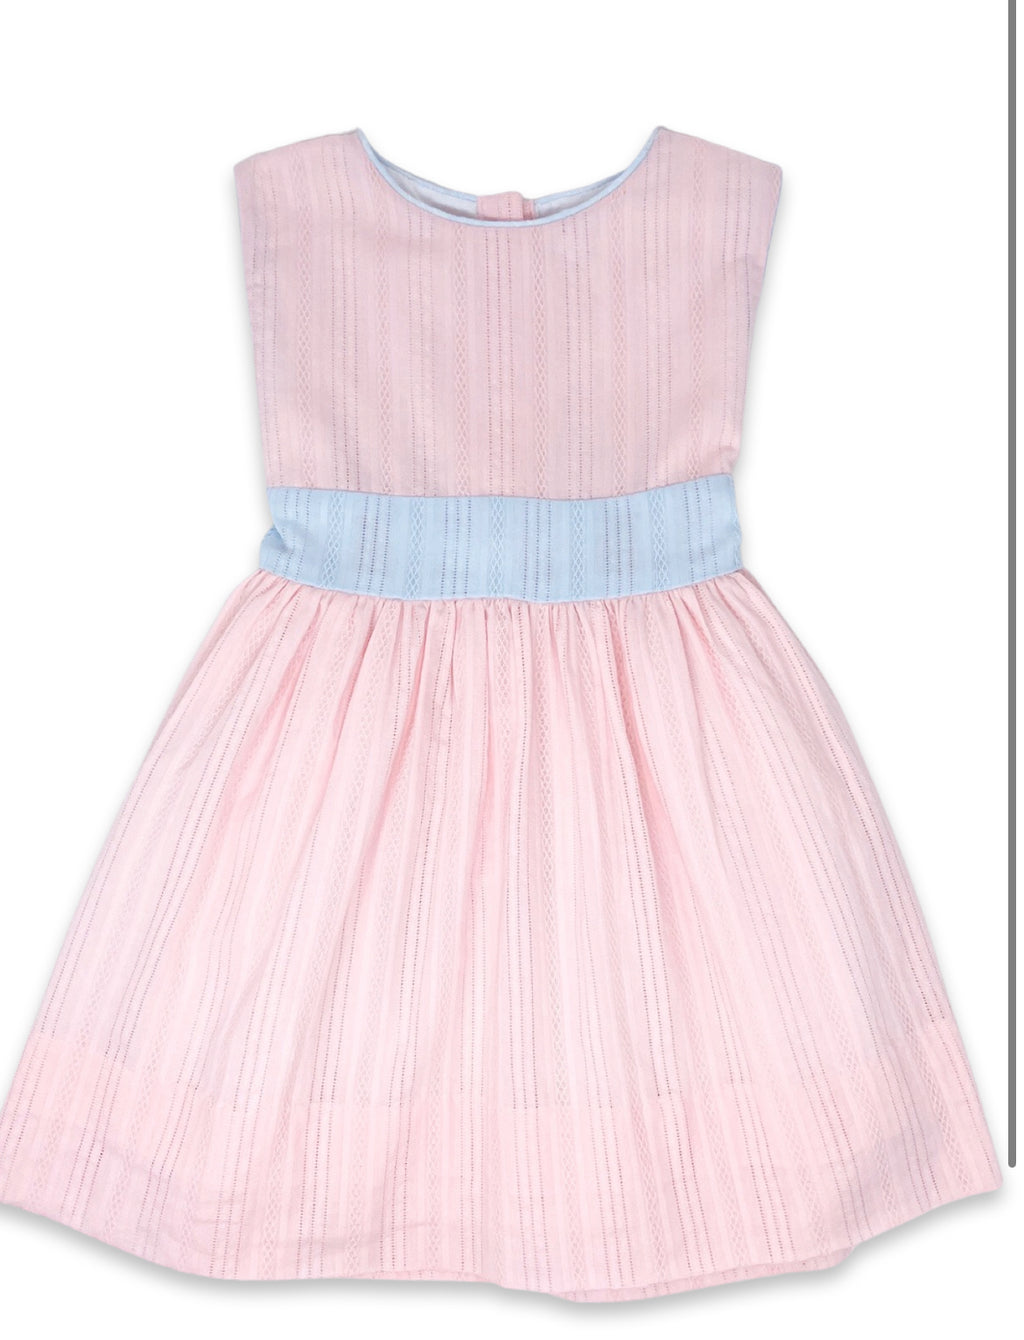 Blissful Band Dress-pink with blue linen band and bow